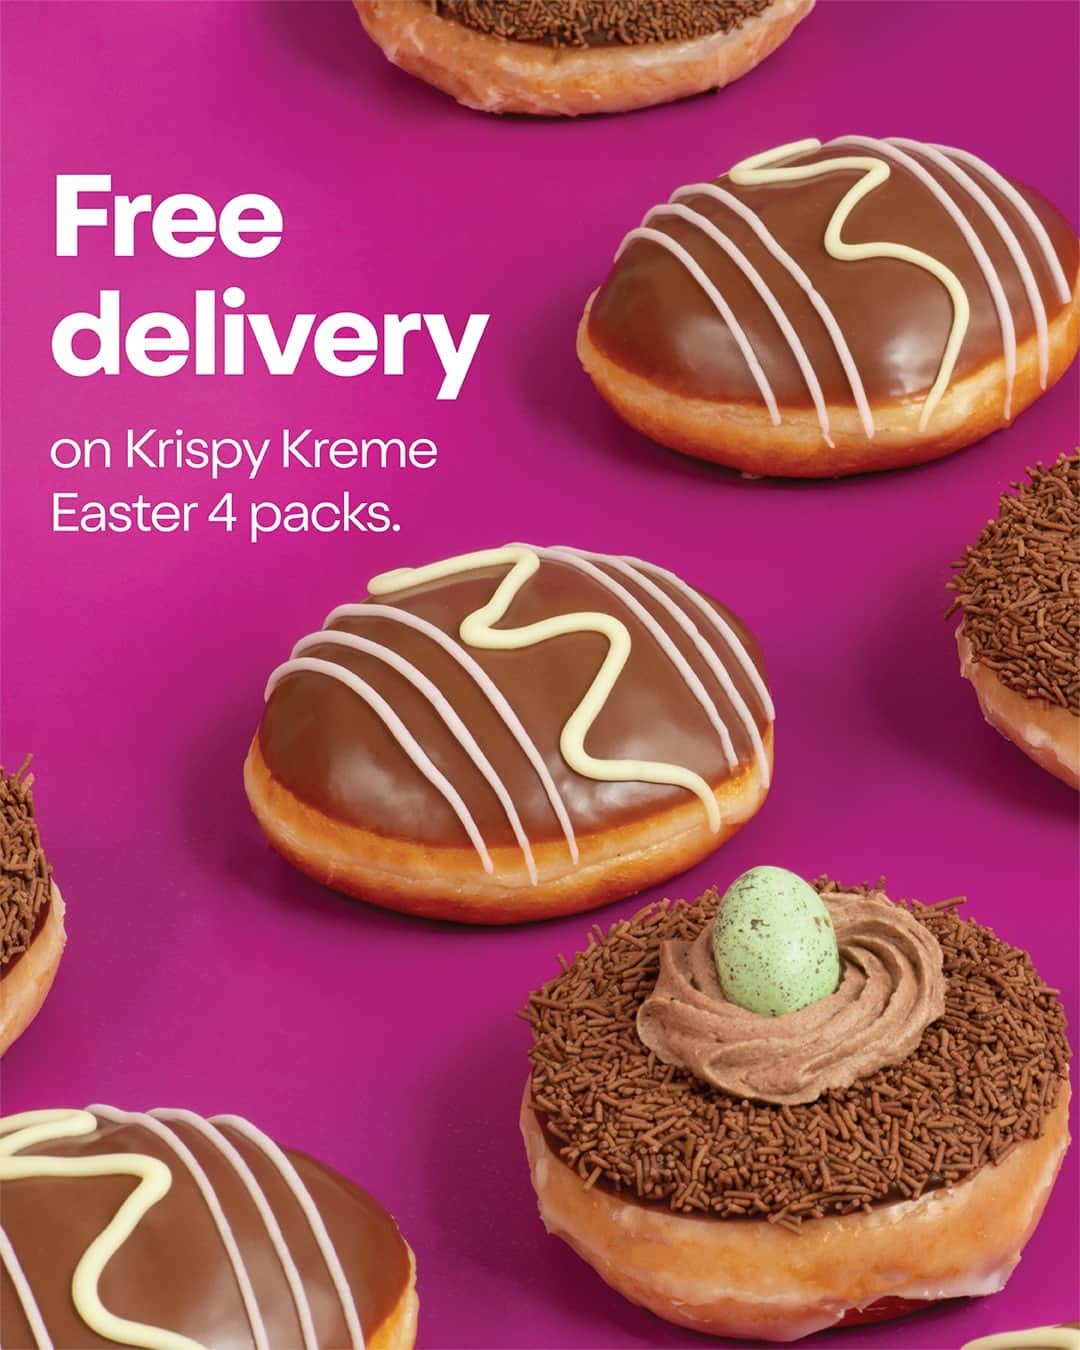 7-Eleven Australiaのインスタグラム：「There are so many eggsellent reasons to be hoppy on Easter and free delivery on @krispykremeaustralia's Darrell Lea Easter doughnuts is just one of them. Head to 7elevendelivery.com.au and don't miss out. #Easter #7ElevenAus #KrispyKreme #Delivery   7-Eleven Delivery is available in selected areas only. $15 minimum order value applies. Offer only available on Krispy Kreme Darrell Lea four packs until Mon 10 April 2023.」